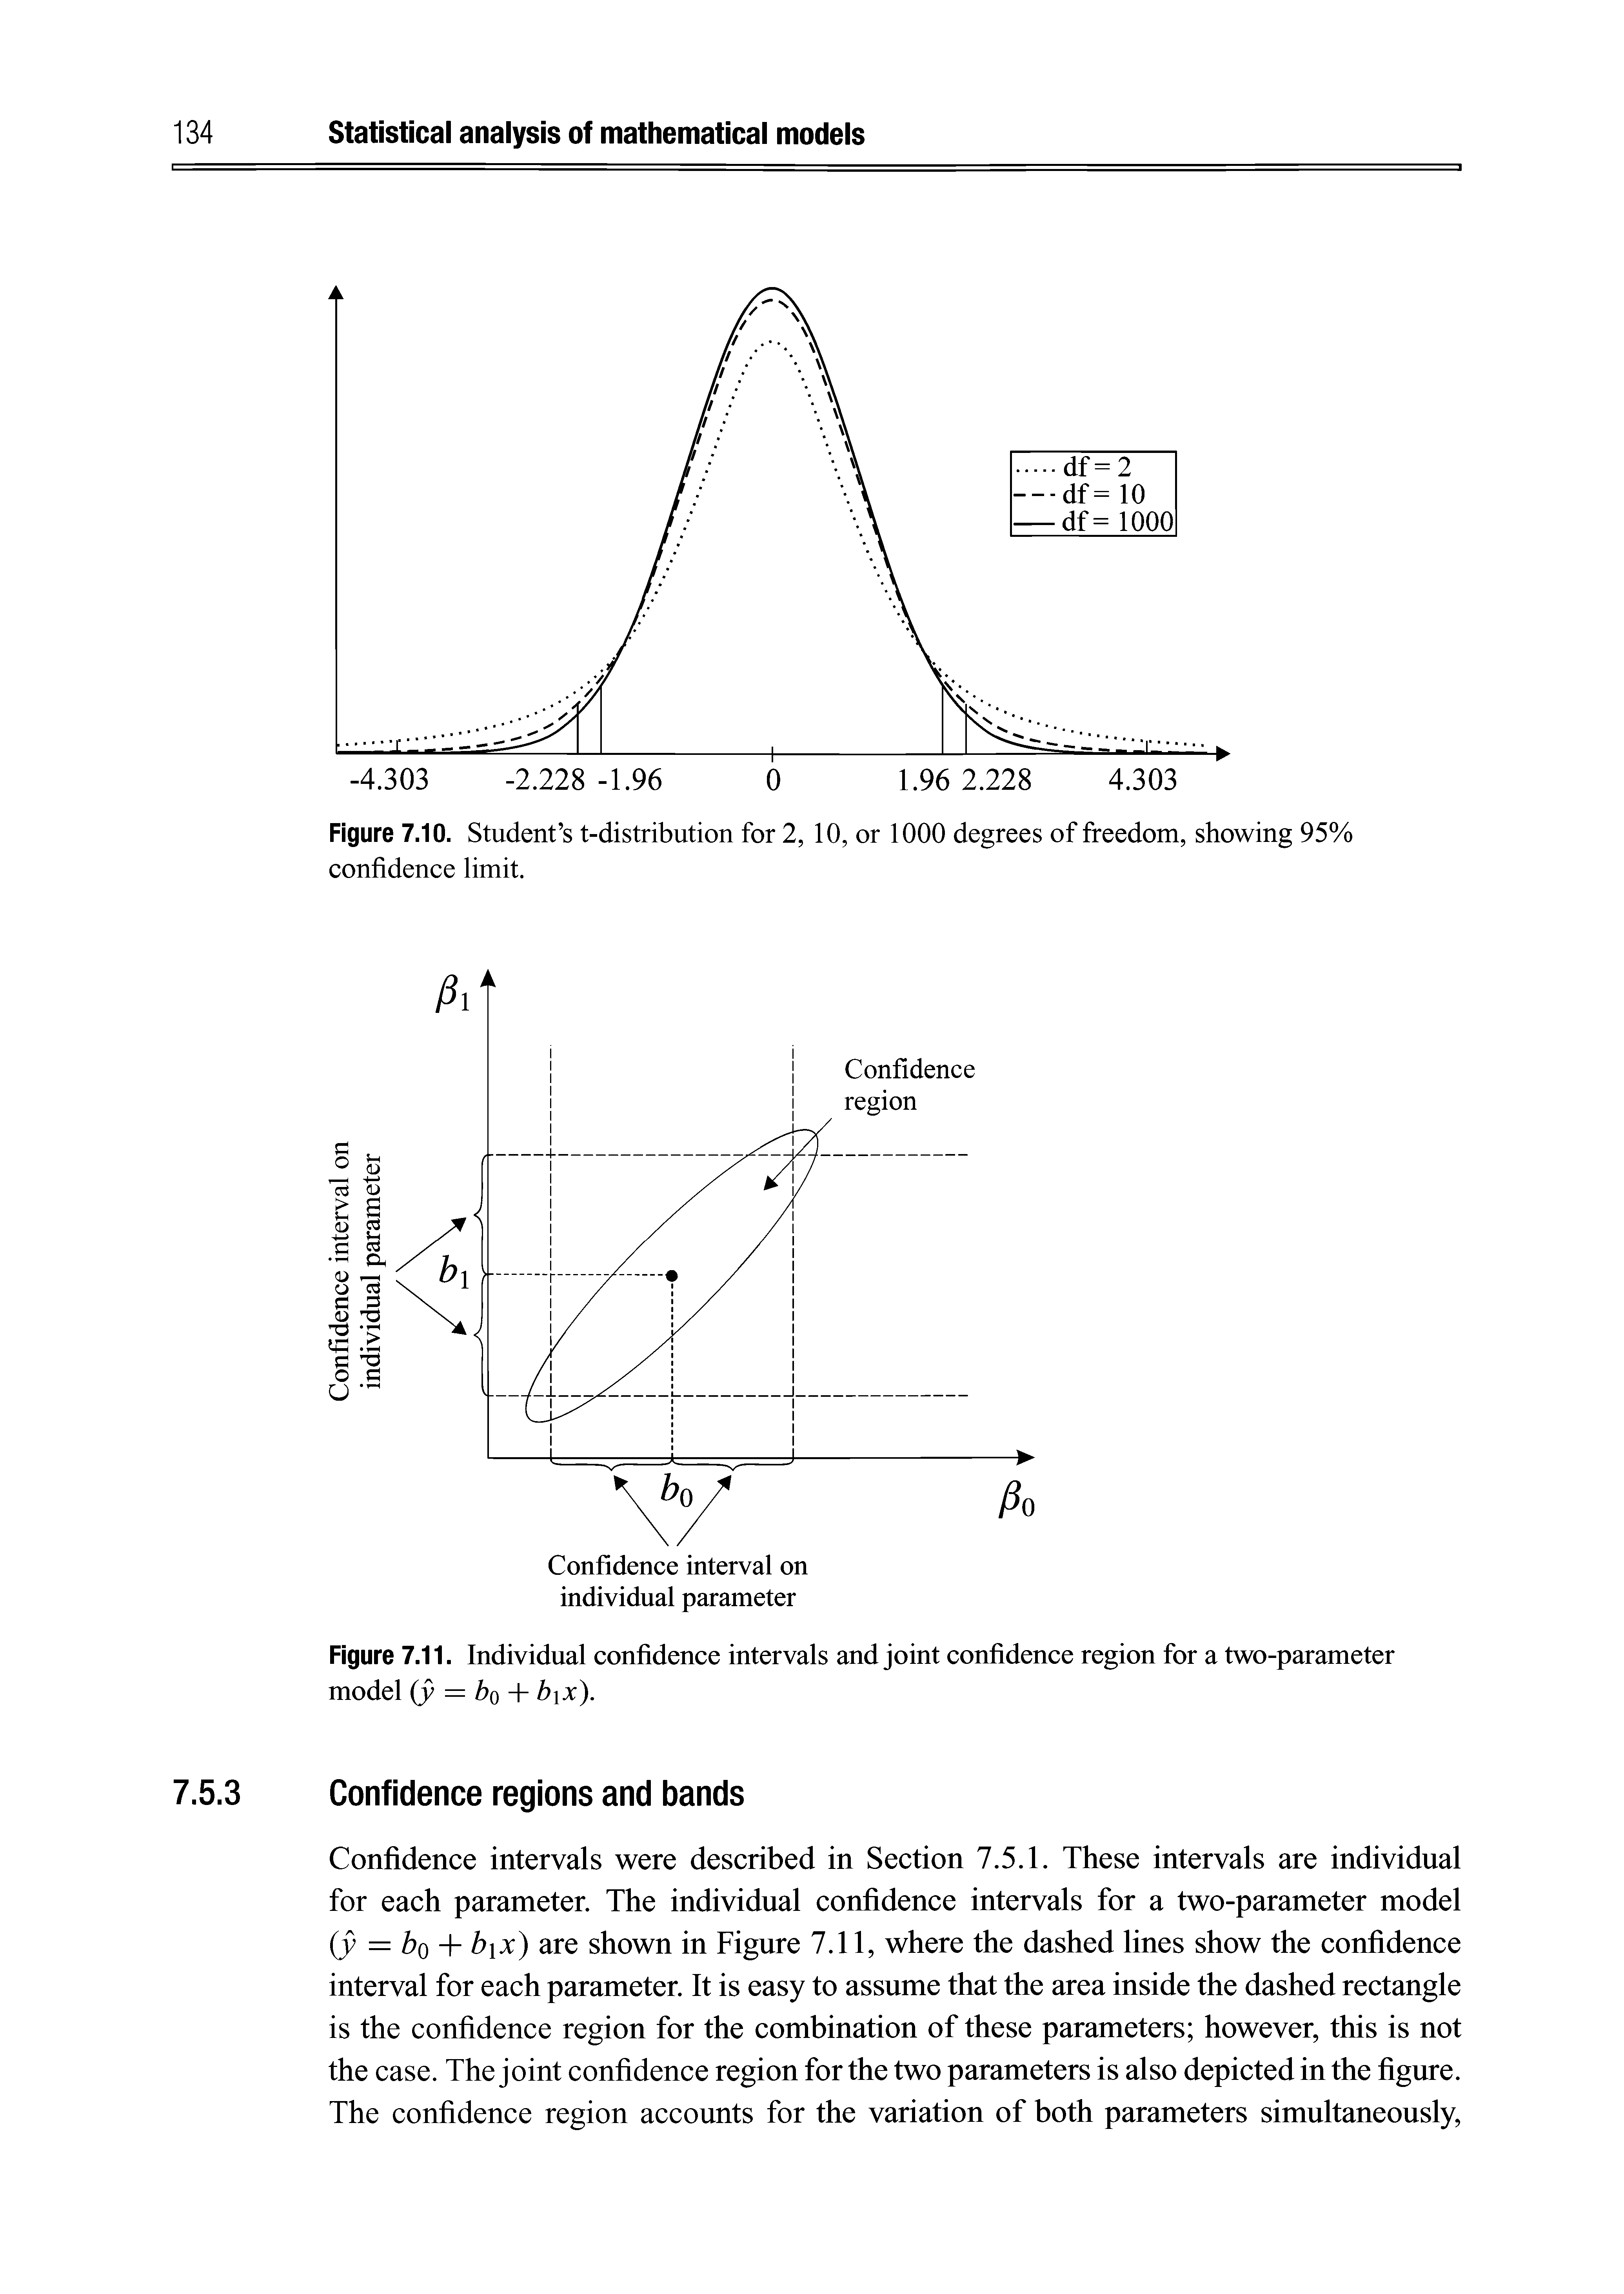 Figure 7.10. Student s t-distribution for 2, 10, or 1000 degrees of freedom, showing 95% confidence limit.